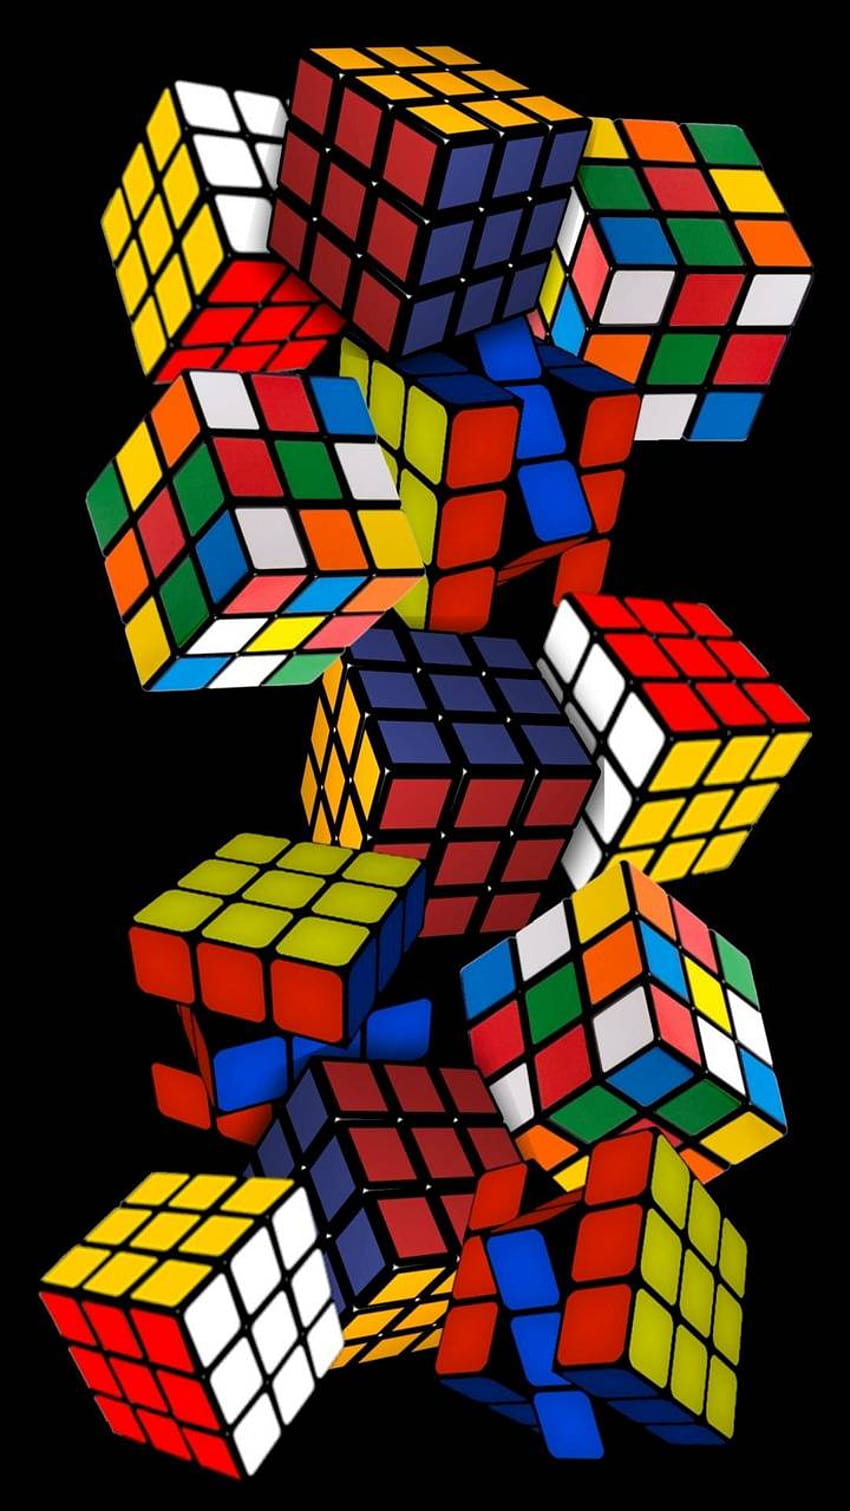 Download wallpaper 480x800 rubiks cube cubes colorful conundrum nokia x  x2 xl 520 620 820 samsung galaxy star ace asus zenfone 4 hd  background